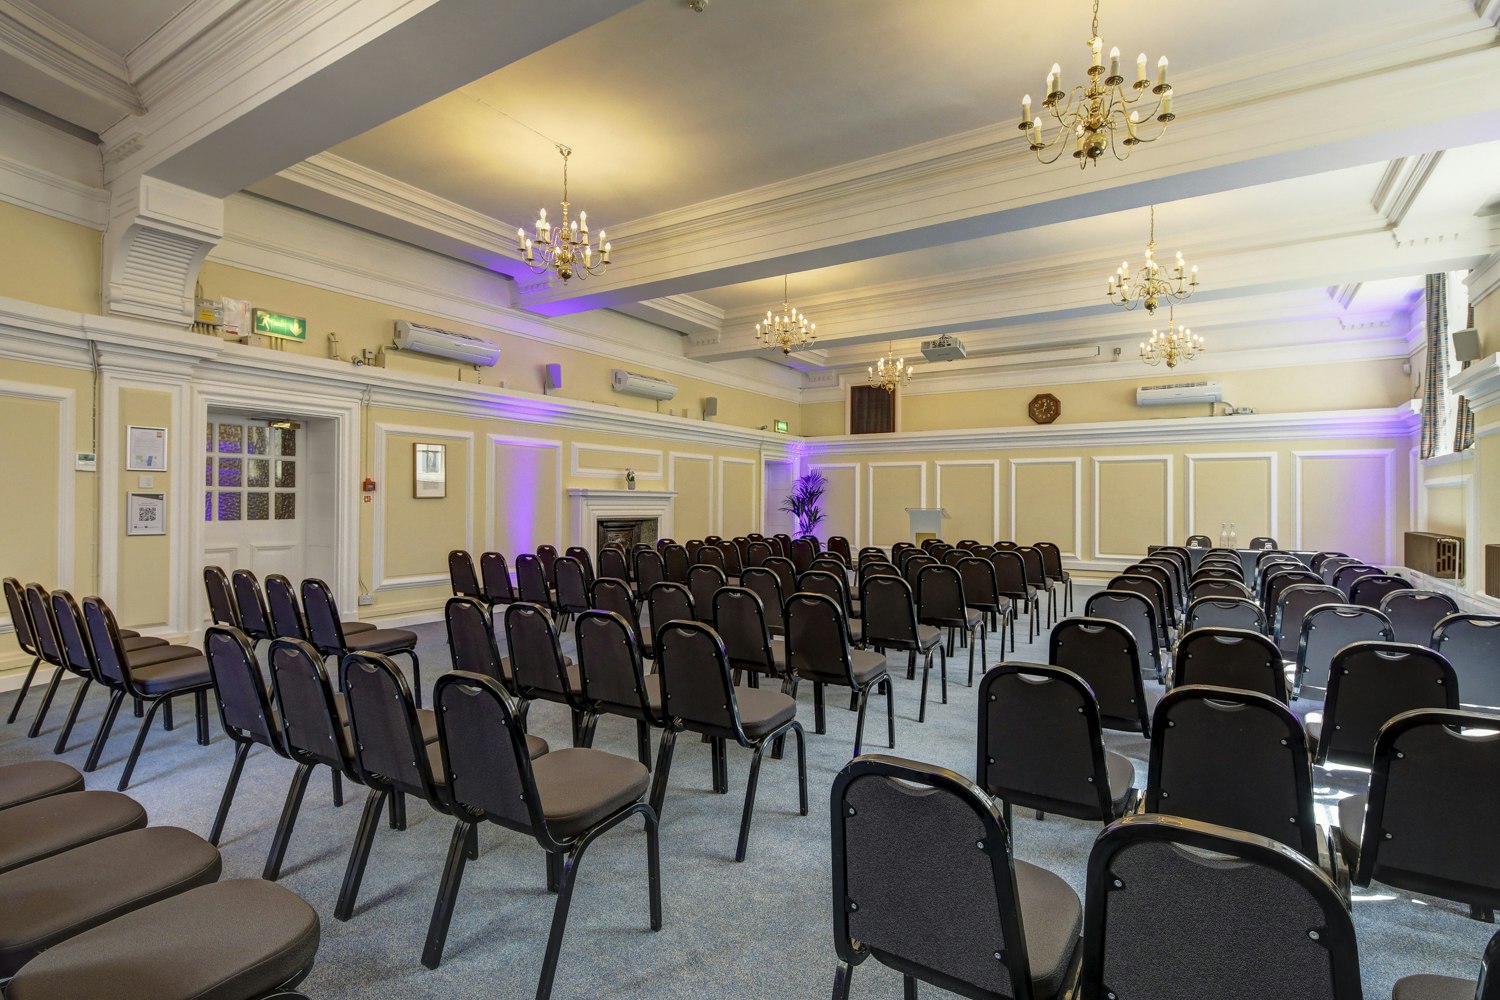 Team Building Events Venues in London - Central Hall Westminster